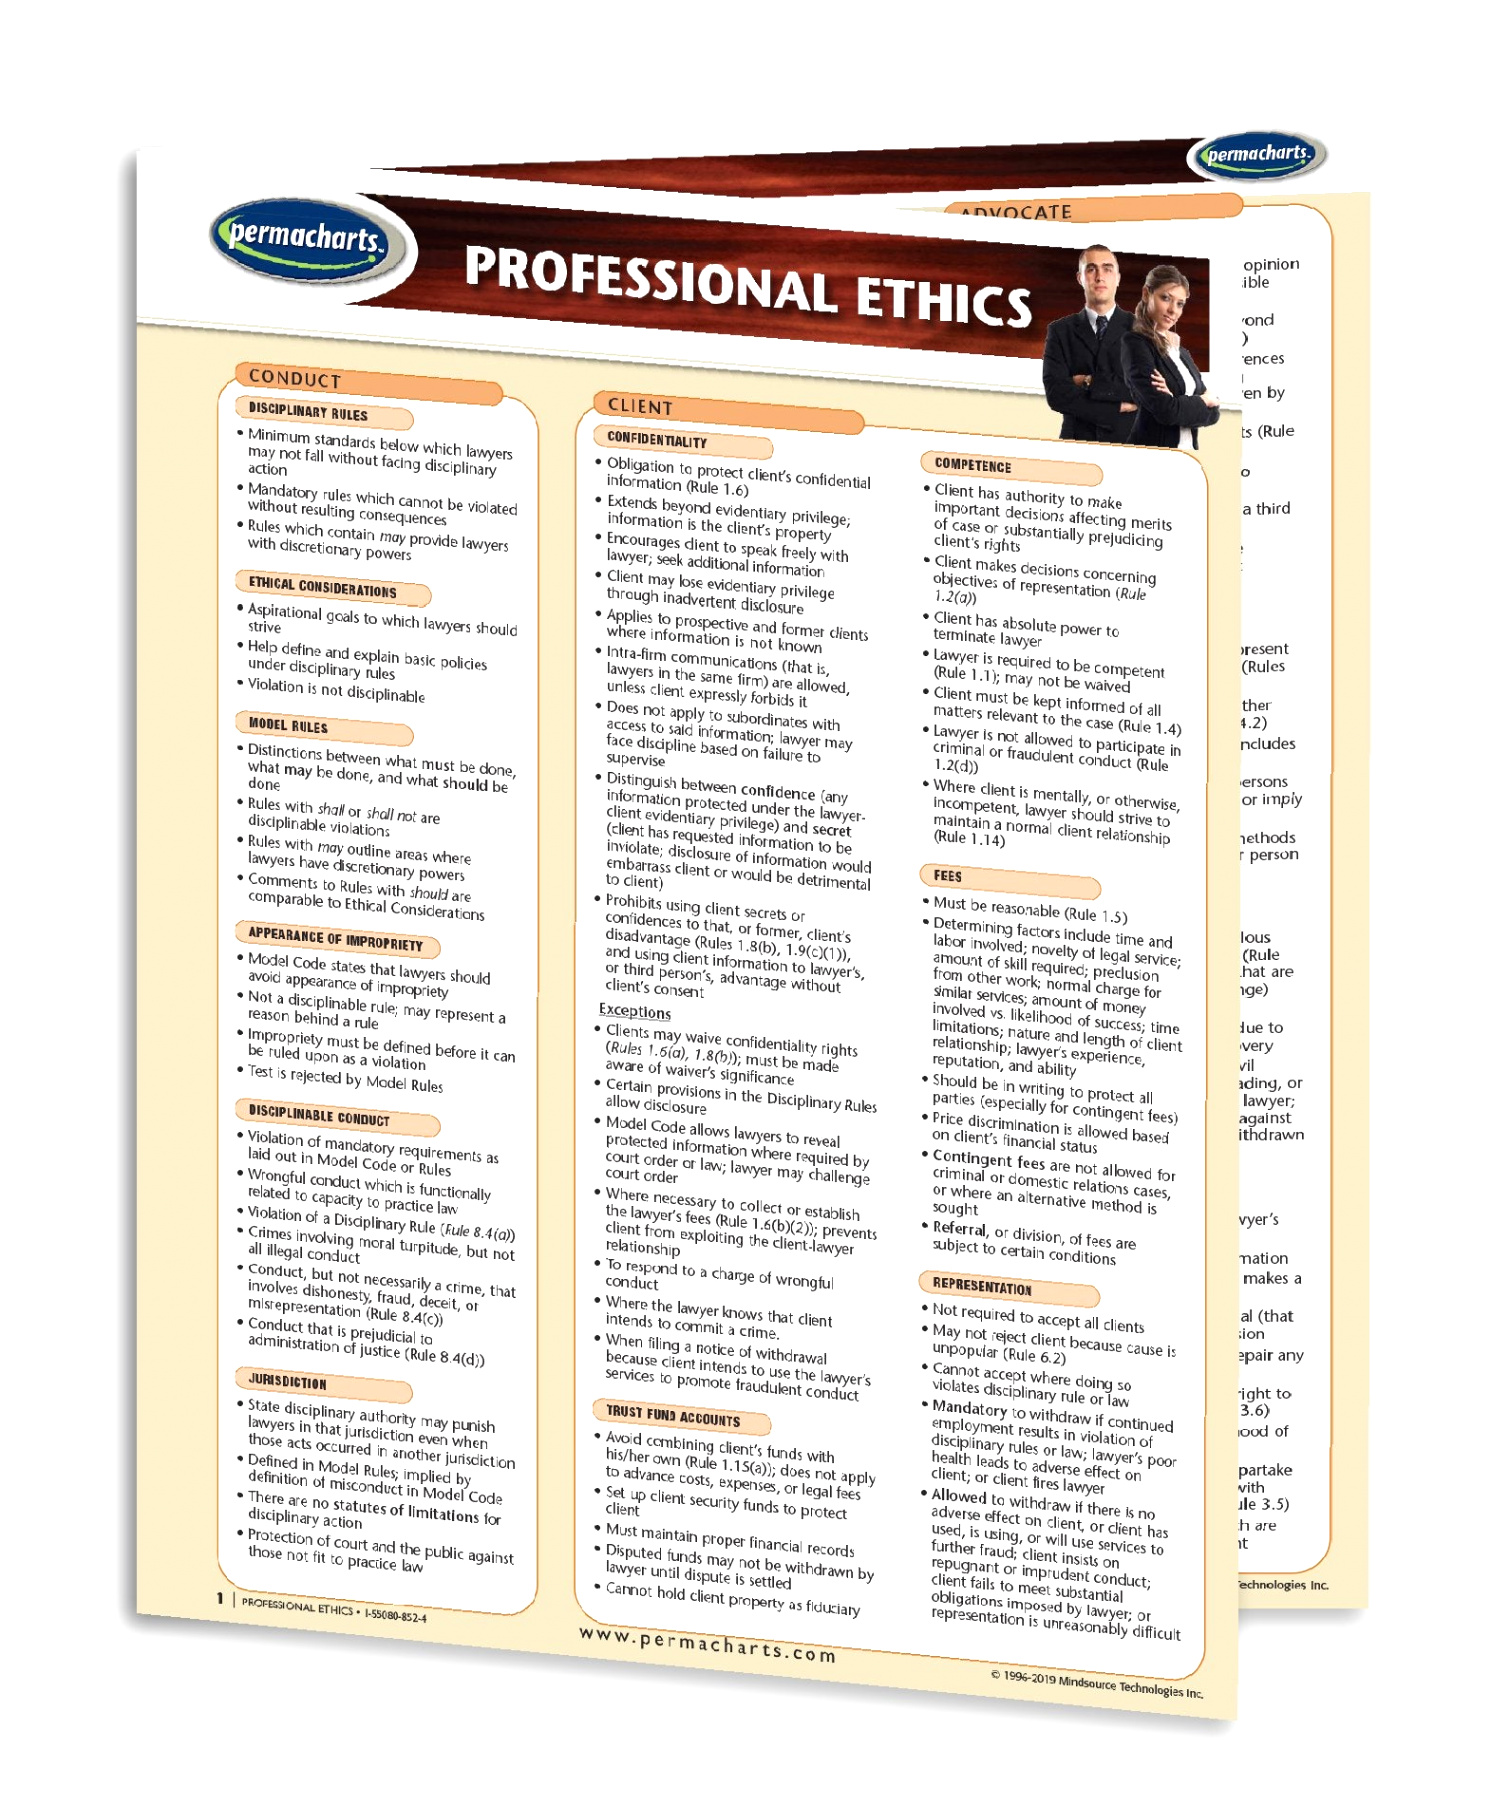 Professional Ethics for Lawyers Dans Professional Ethics Guide - Business Quick Reference Guide